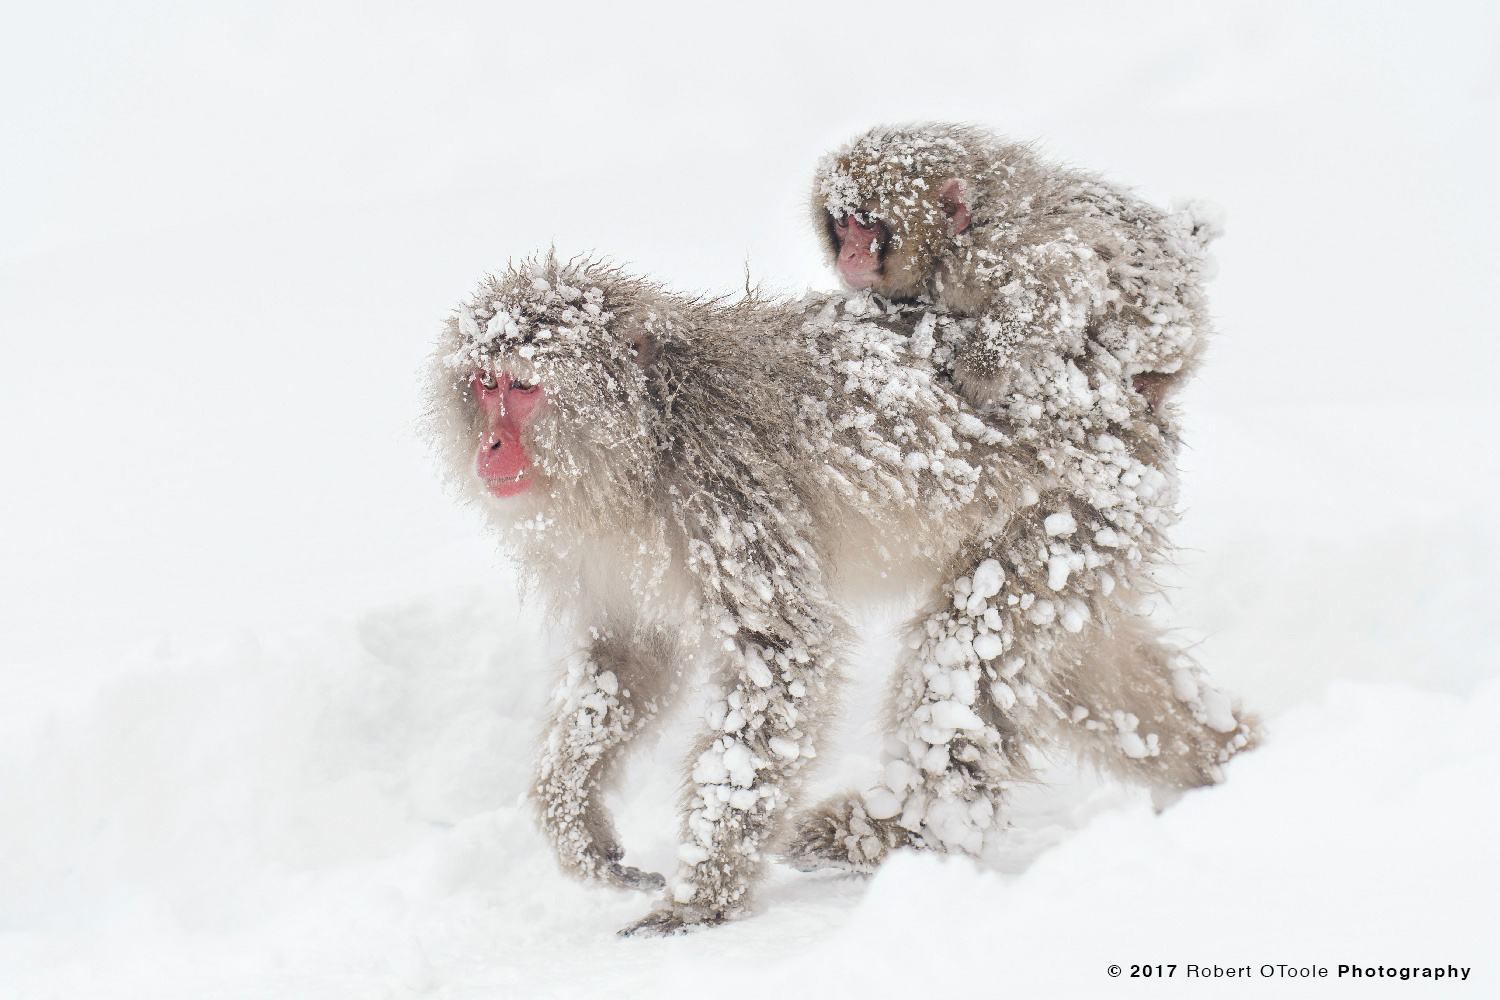 Infant Snow Monkey Riding Adult After a Blizzard